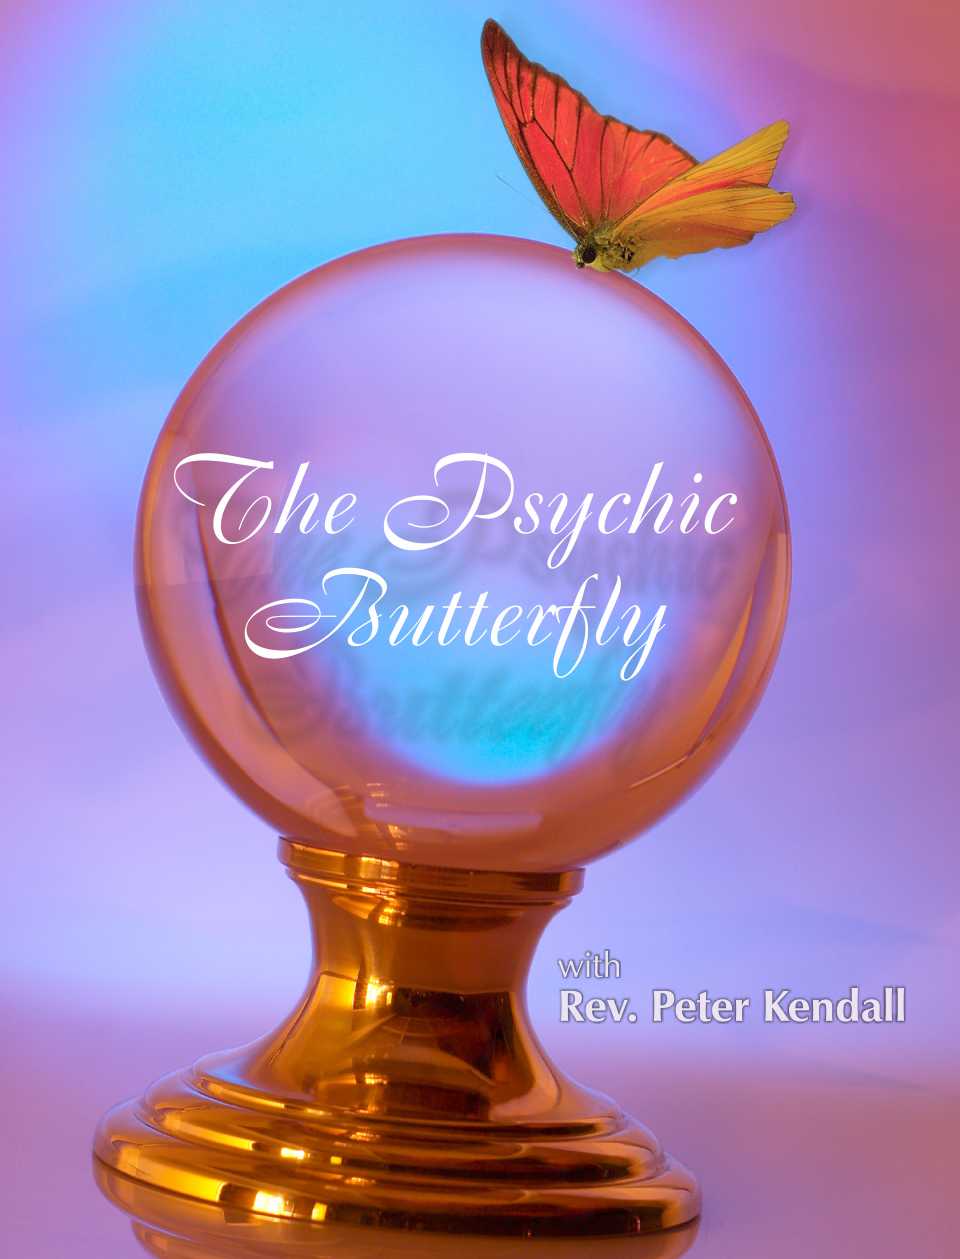 The Psychic Butterfly, with Rev. Peter Kendall